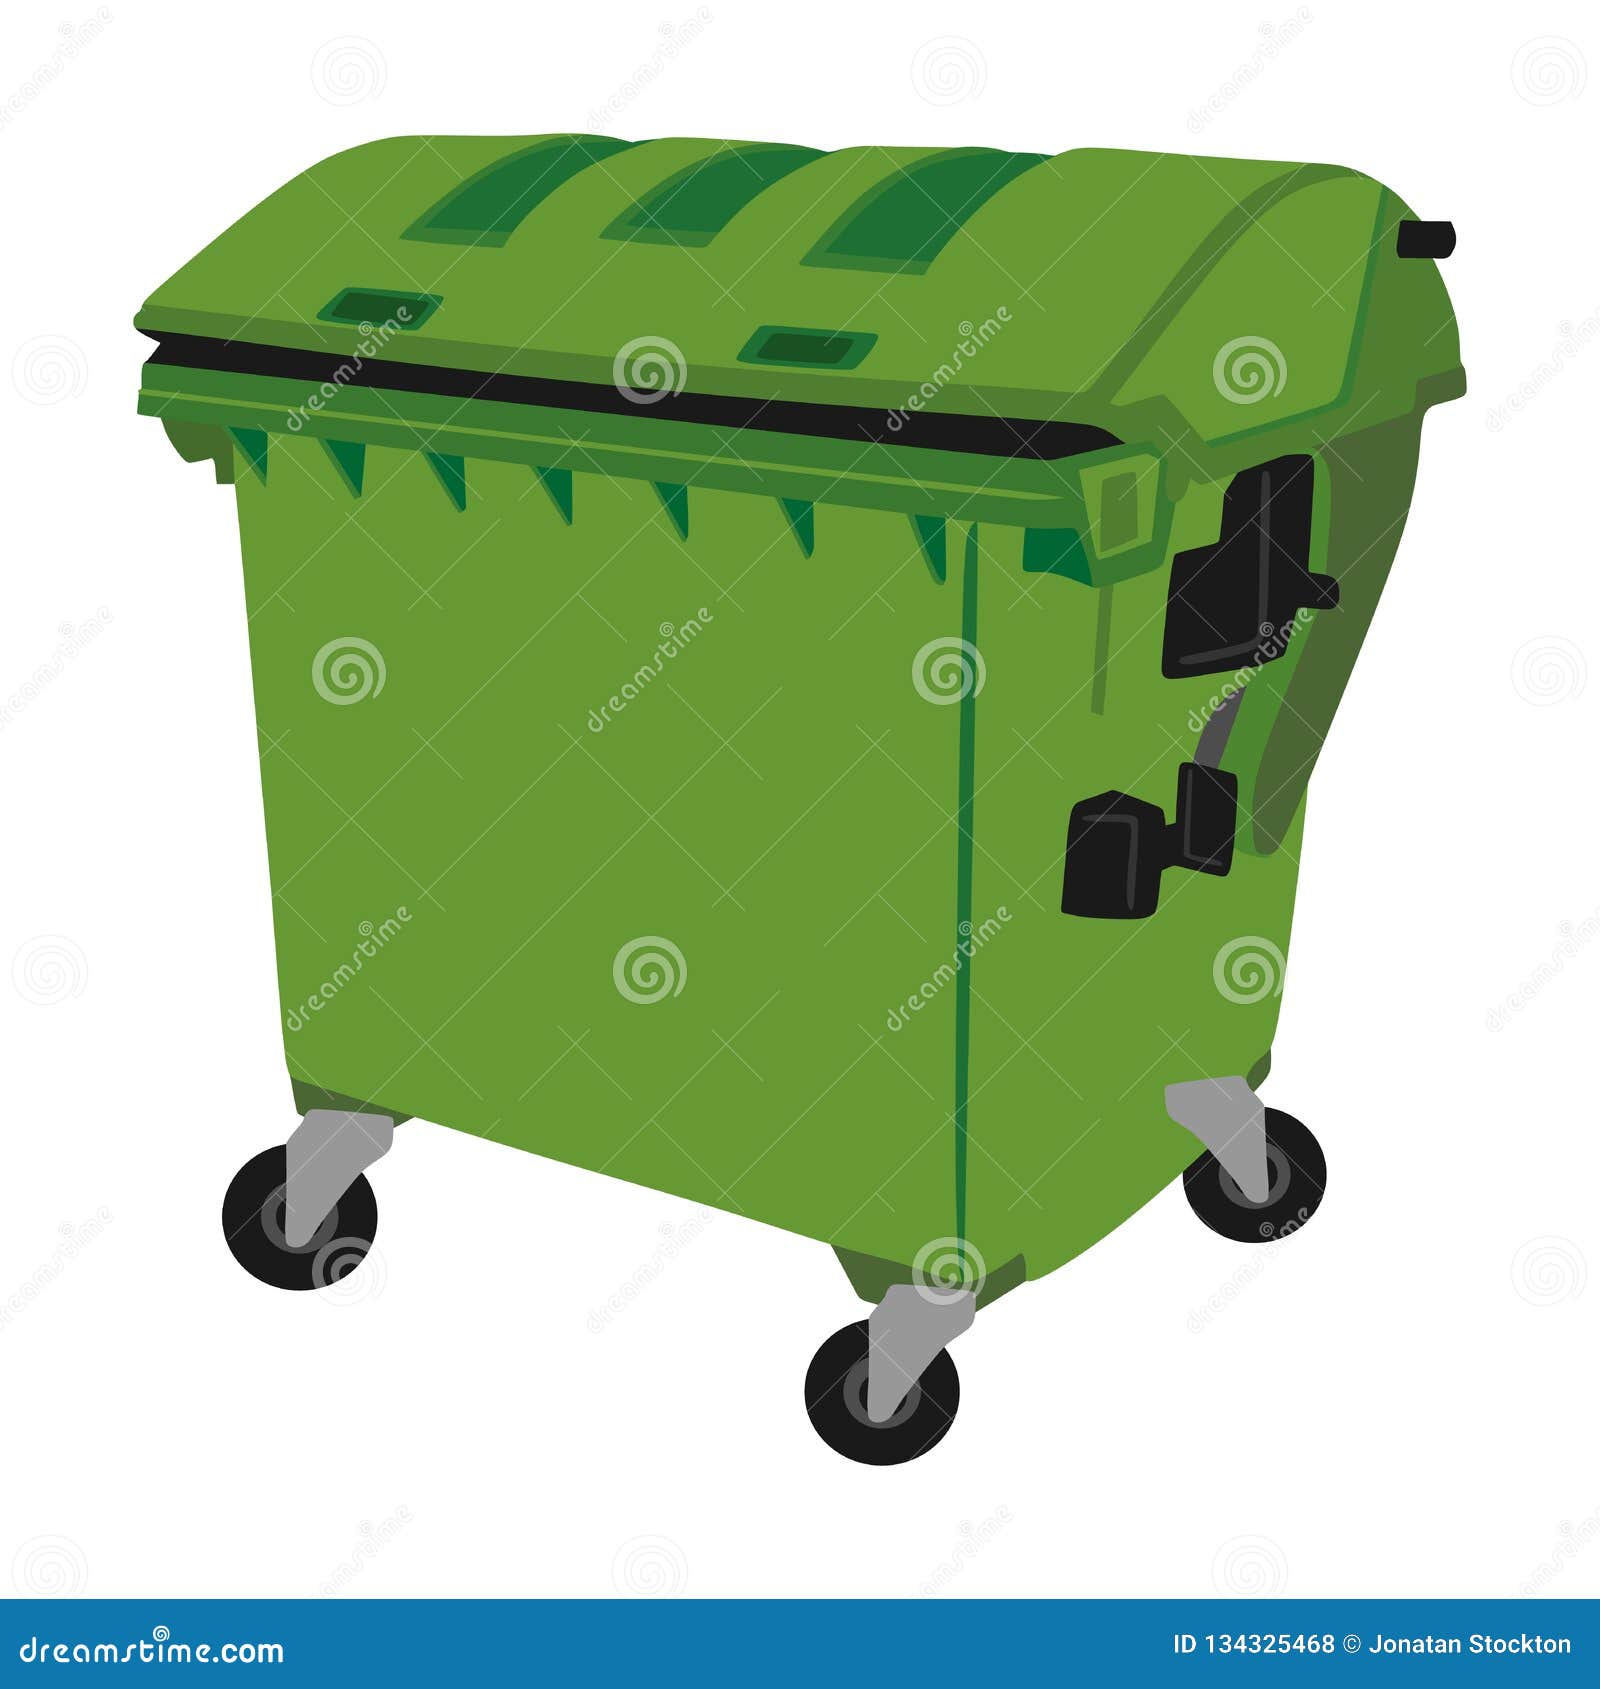 https://thumbs.dreamstime.com/z/street-garbage-can-trash-bin-plastic-dustbin-recycle-bin-street-garbage-can-container-isolated-white-clipping-path-trash-134325468.jpg